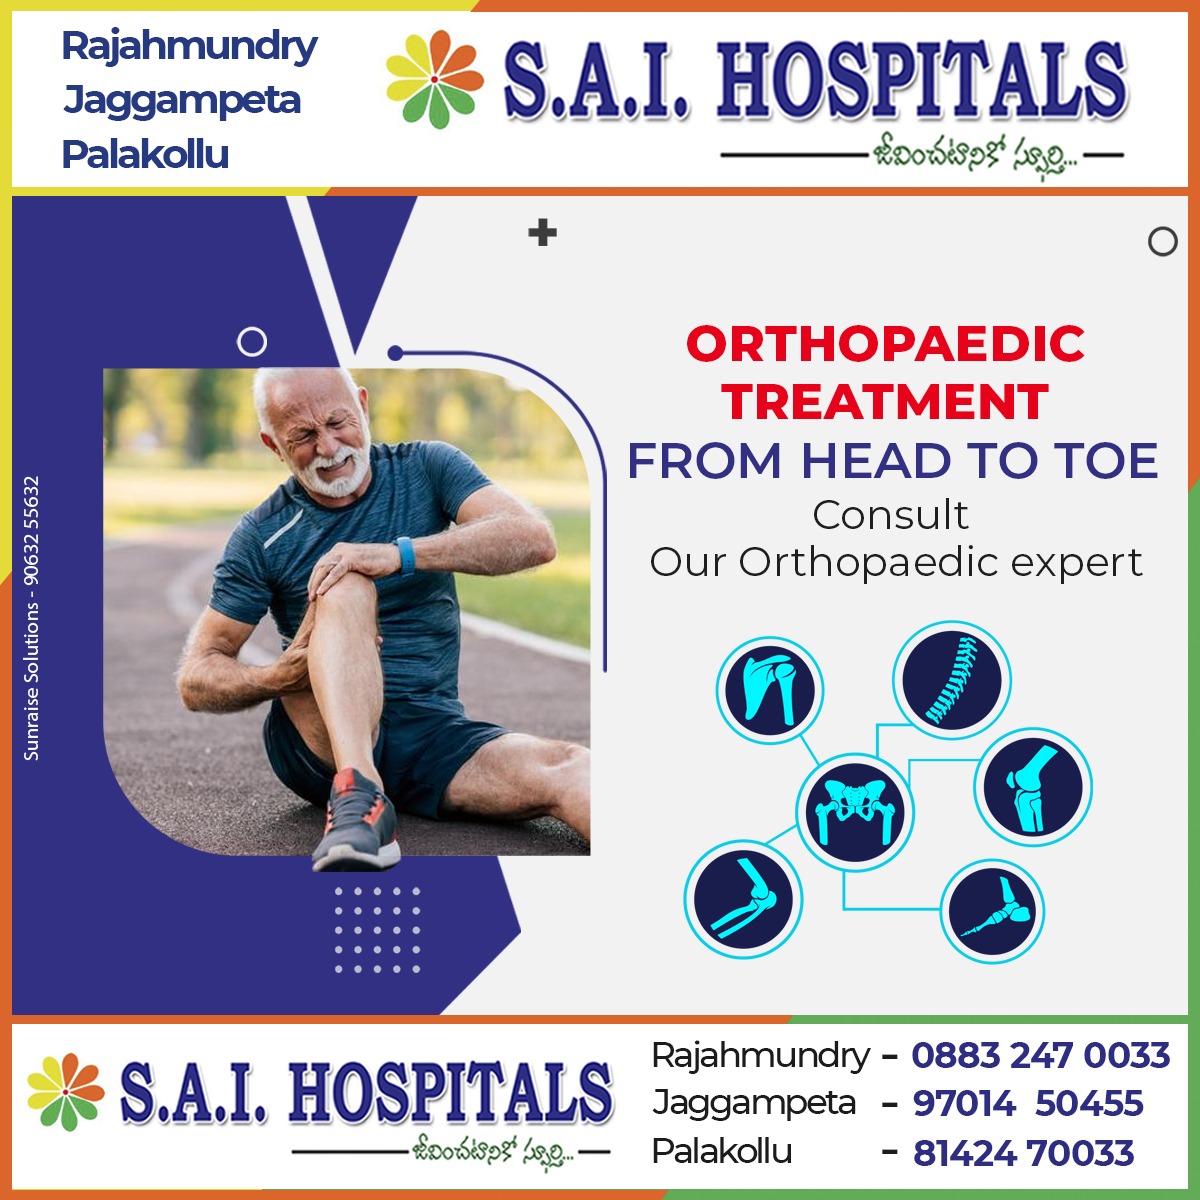 ORTHOPAEDIC TREATMENT FROM HEAD TO TOE
Consult Our Orthopaedic expert
Contact: 0883 247 0033
Mail us: saiadmin@saihospitals.com
#saihospitals #Providing #highestquality #we #remove #obstacles  #TRAUMA #FRACTURE #BACKPAIN #ARTHRITIS #care #experts #MedicalTreatment #repost